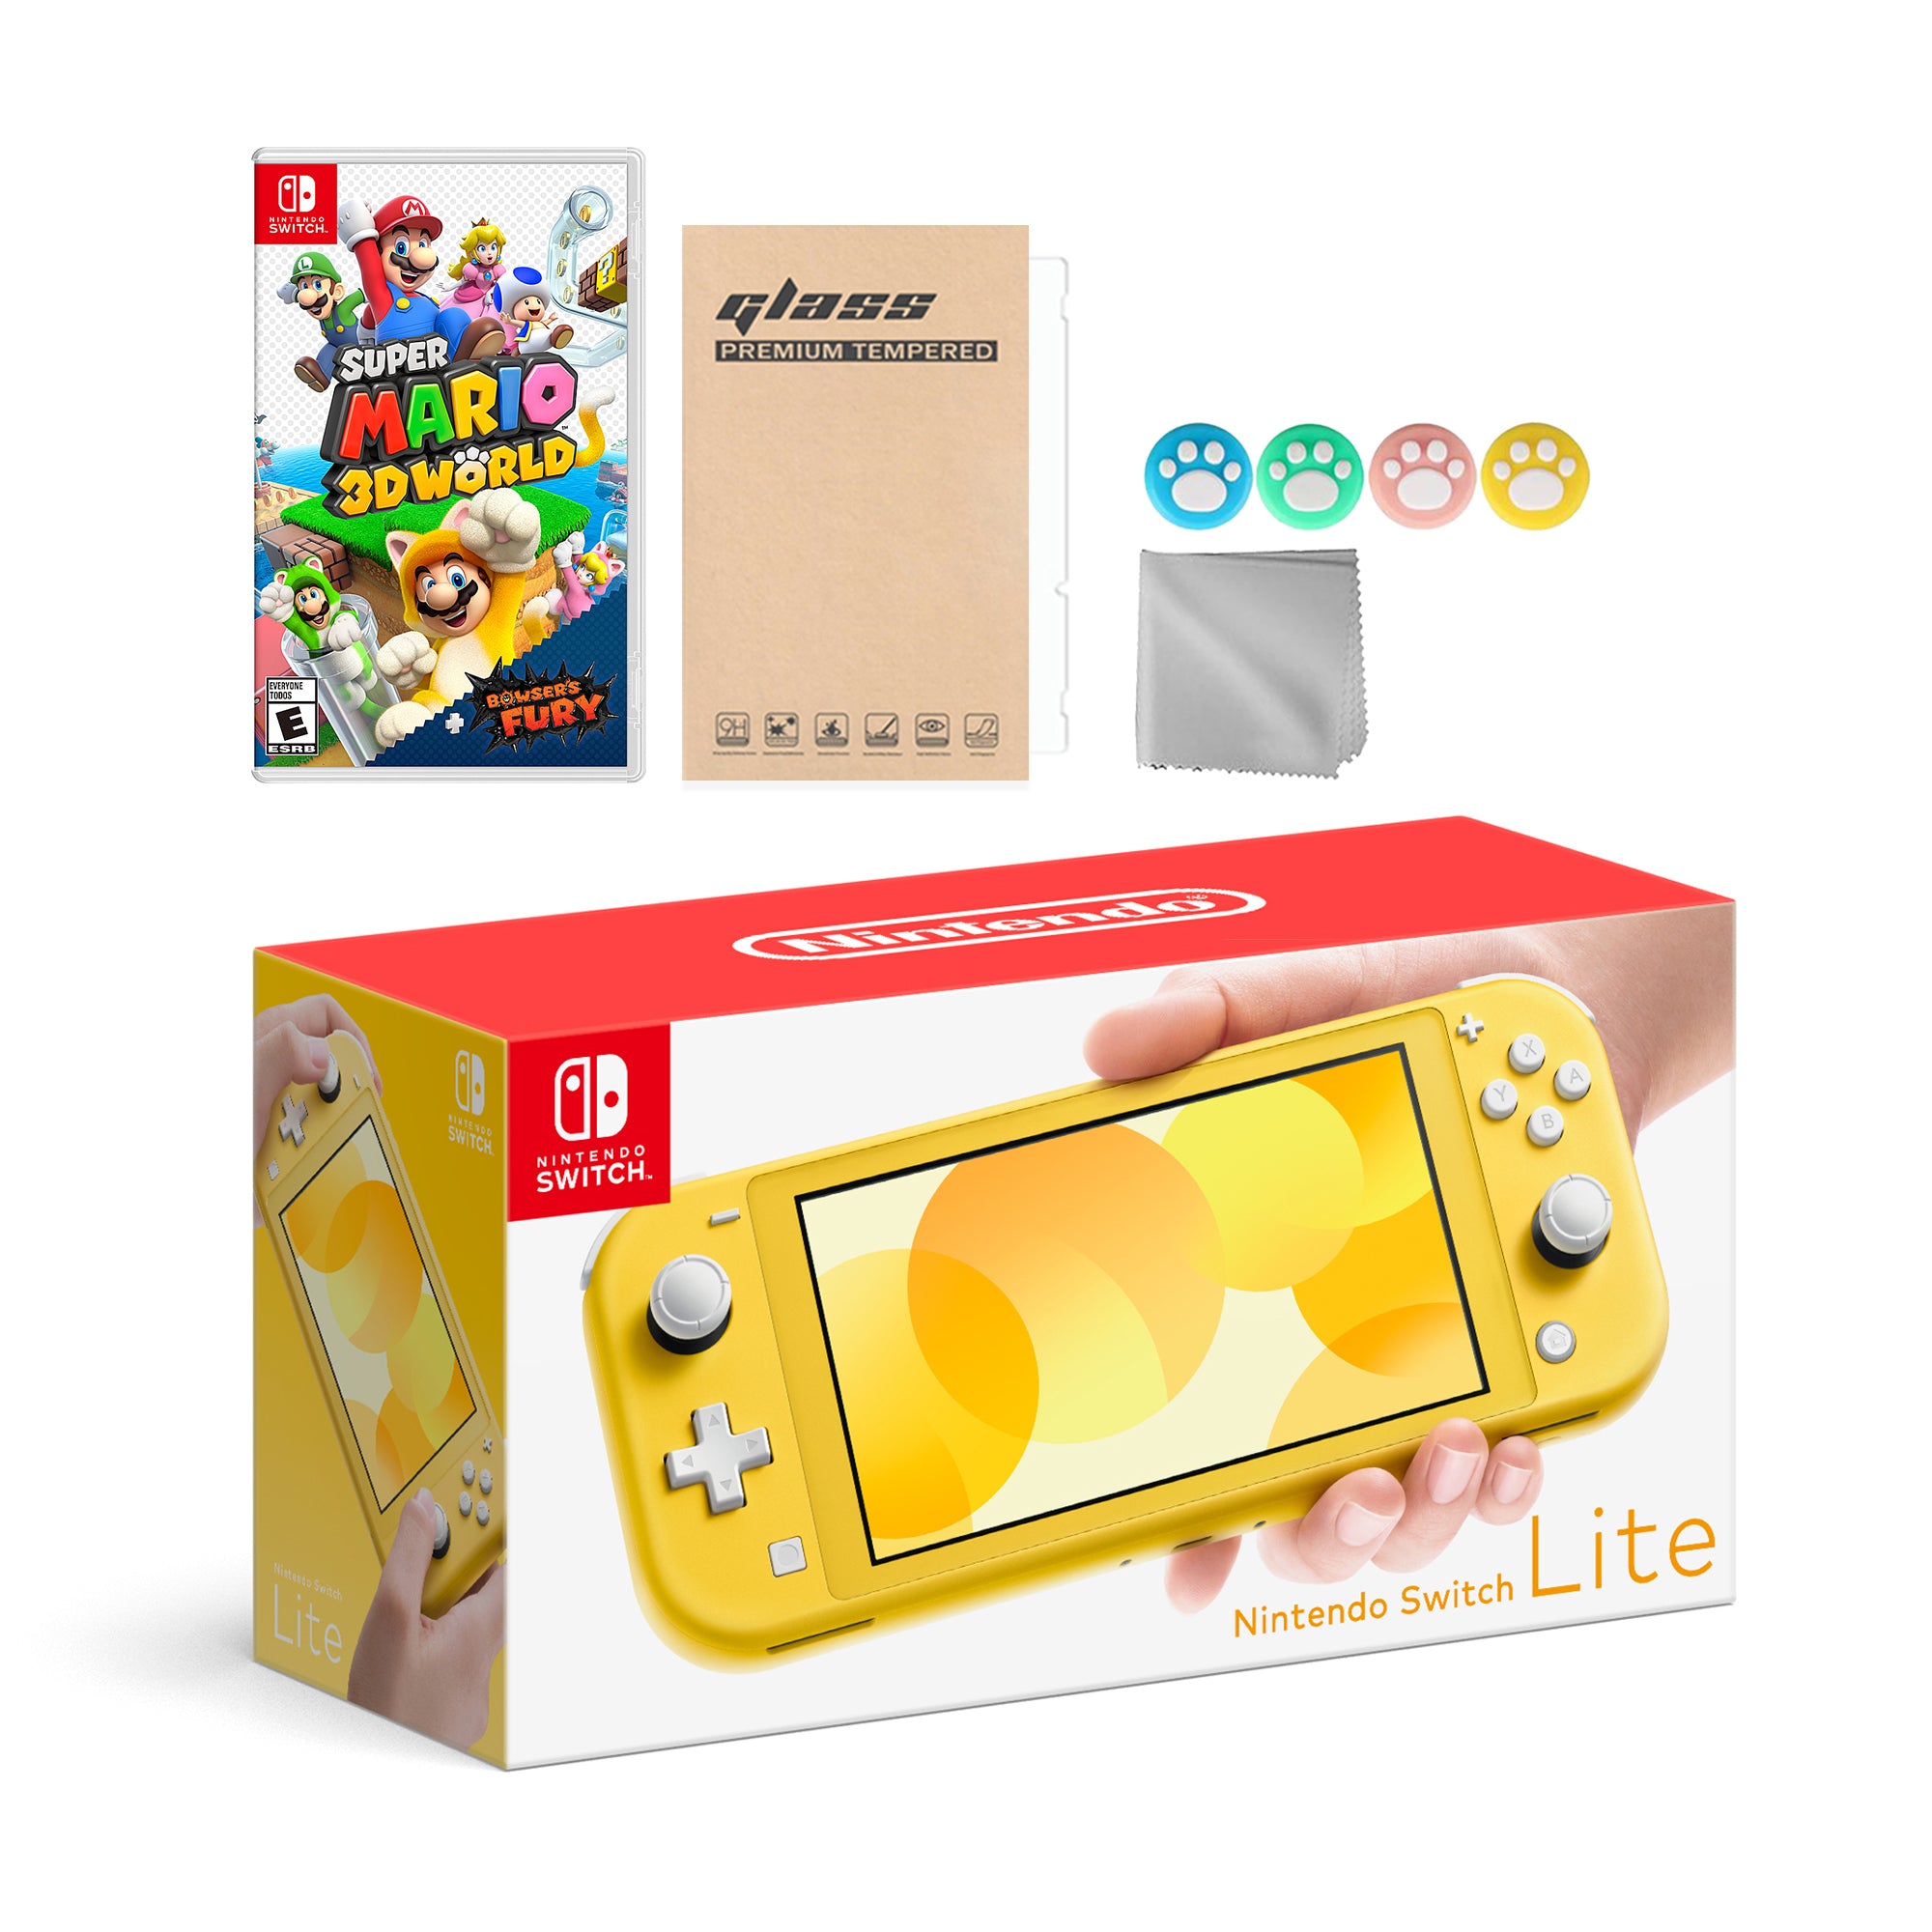 Nintendo Switch Lite Yellow with Super Mario 3D World + Bowser's Fury and Mytrix Accessories NS Game Disc Bundle Best Holiday Gift